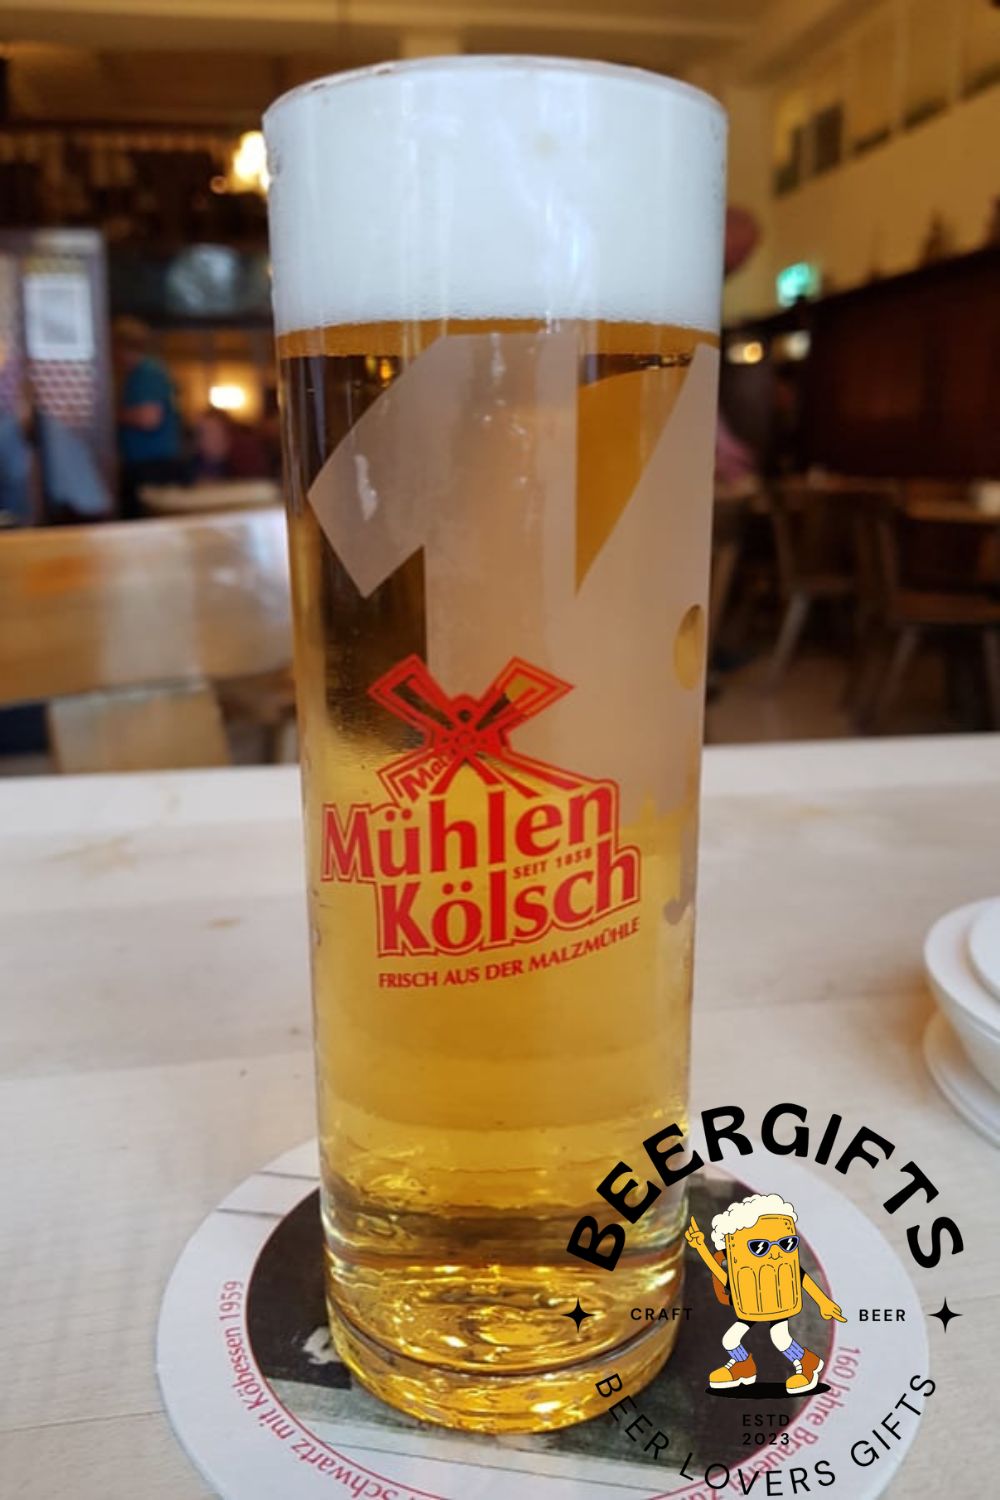 Kolsch Style Beer Everything You Need to Know3